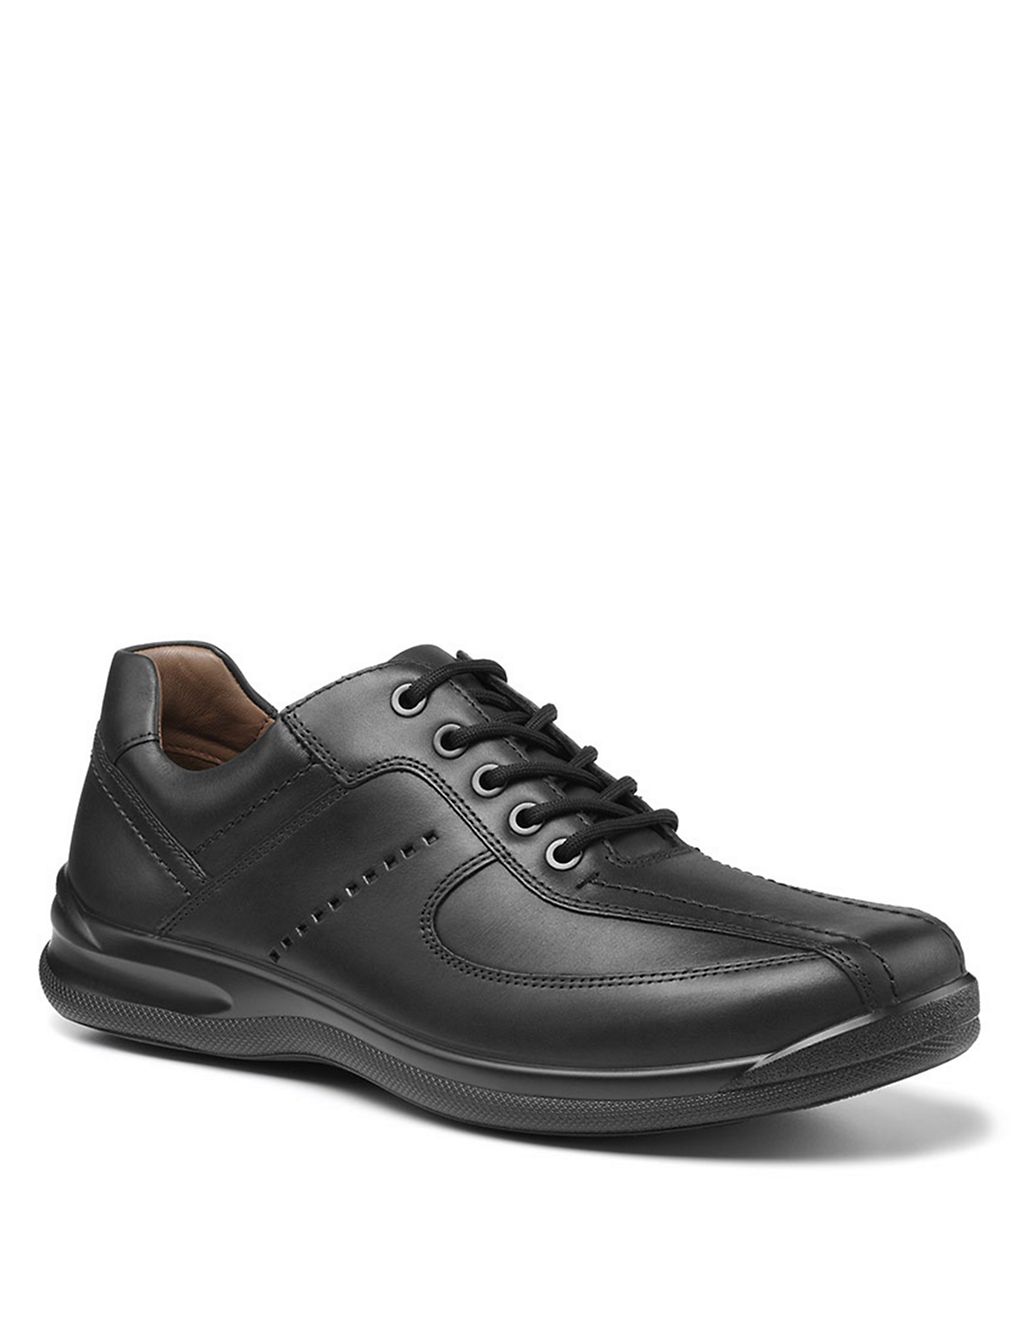 Lance Leather Lace-Up Shoes | Hotter | M&S